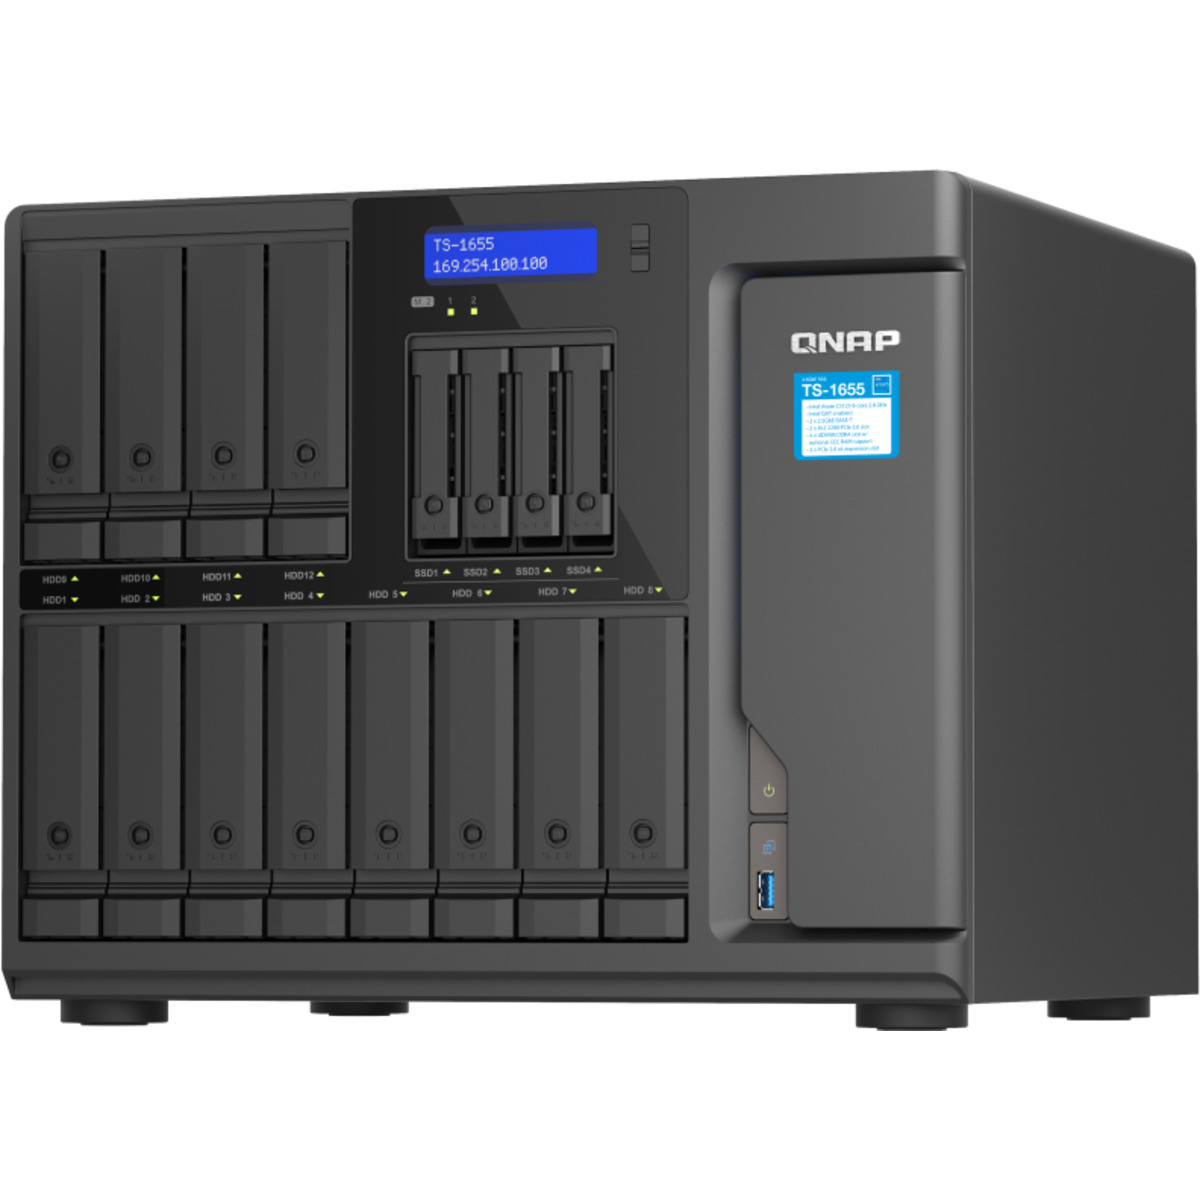 QNAP TS-1655 16tb 12+4-Bay Desktop Multimedia / Power User / Business NAS - Network Attached Storage Device 8x2tb Western Digital Red SA500 WDS200T1R0A 2.5 560/530MB/s SATA 6Gb/s SSD NAS Class Drives Installed - Burn-In Tested - FREE RAM UPGRADE TS-1655